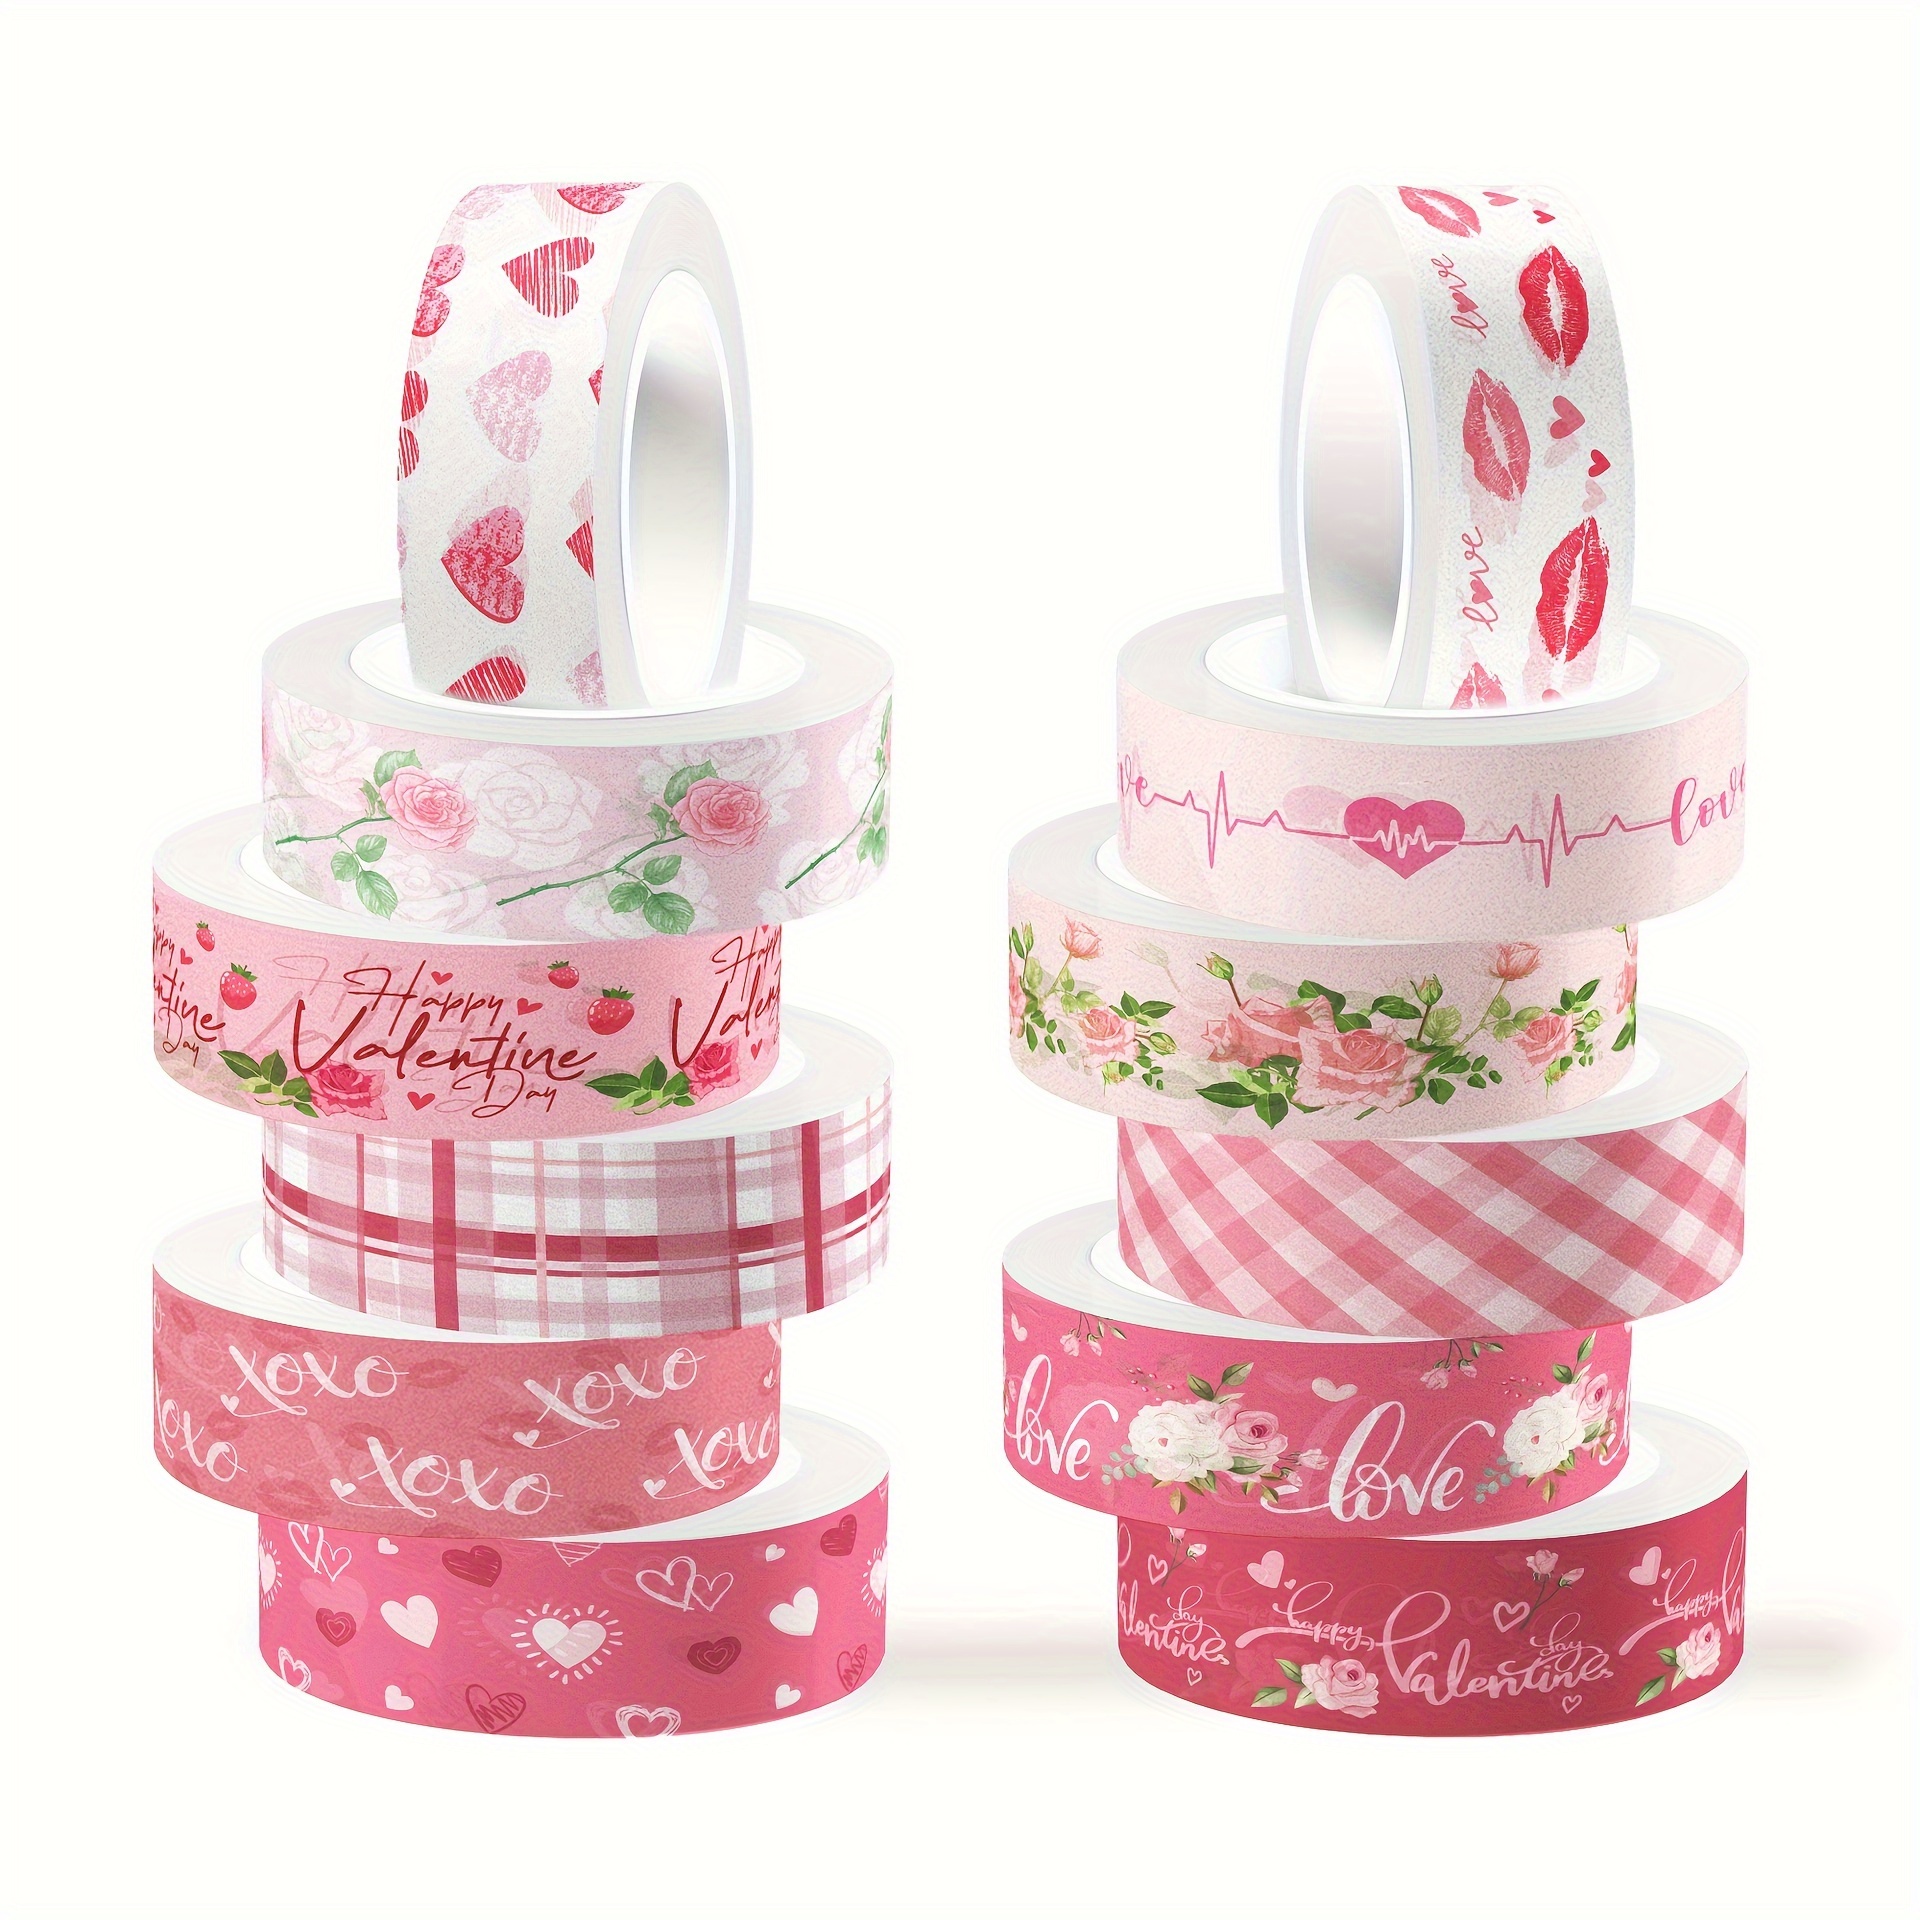 14 Rolls Love and Paper Tape DIY Masking Tapes Heart Tape for Crafts Pink  washi Notebook Tape DIY Craft Tape Scrapbook Decorative Tape Valentine  washi